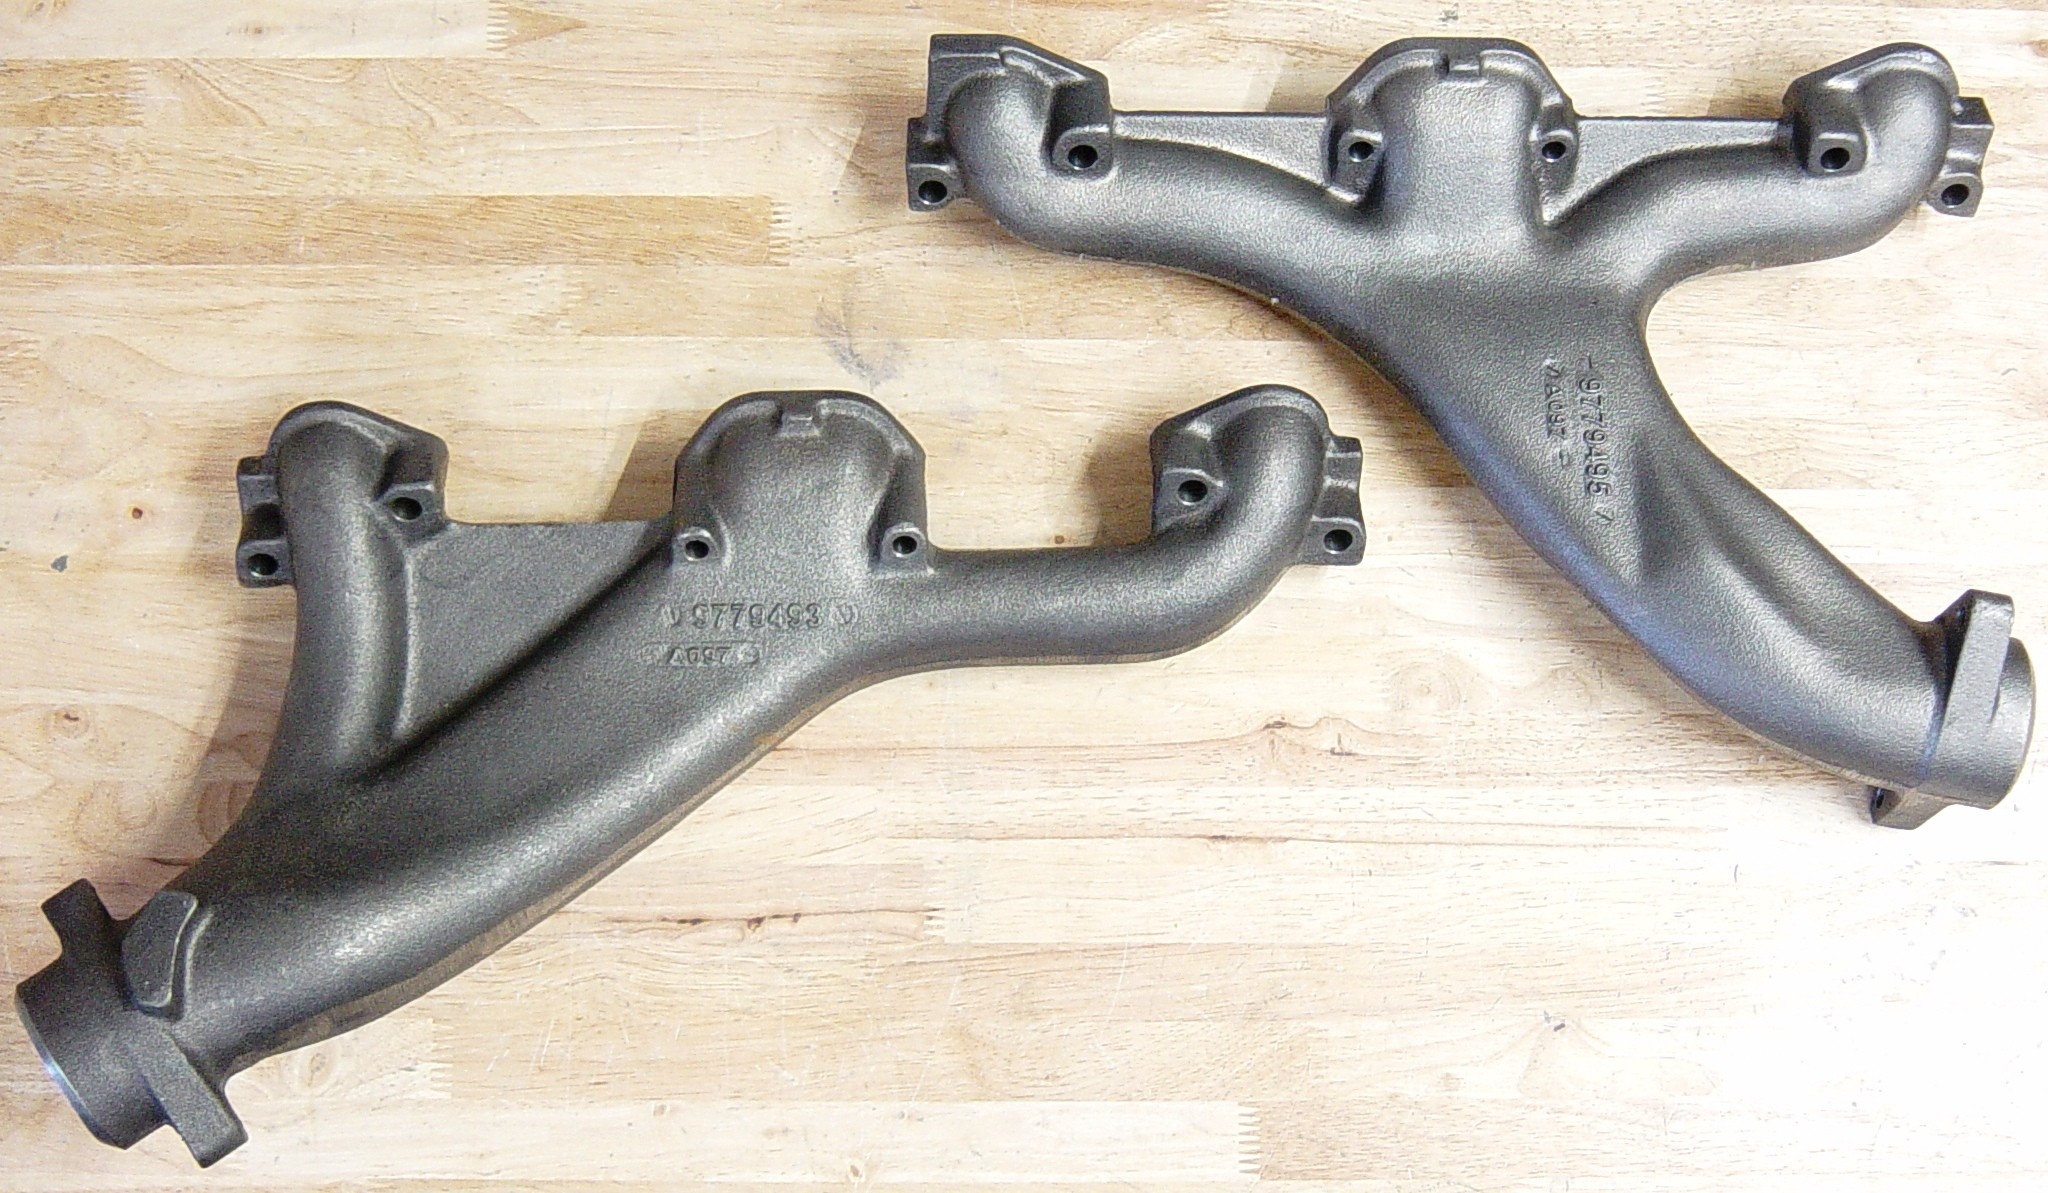 LB-1F  Dport Long Branch factory headers/performance manifolds for 1967-1969 Firebird--bare no coating